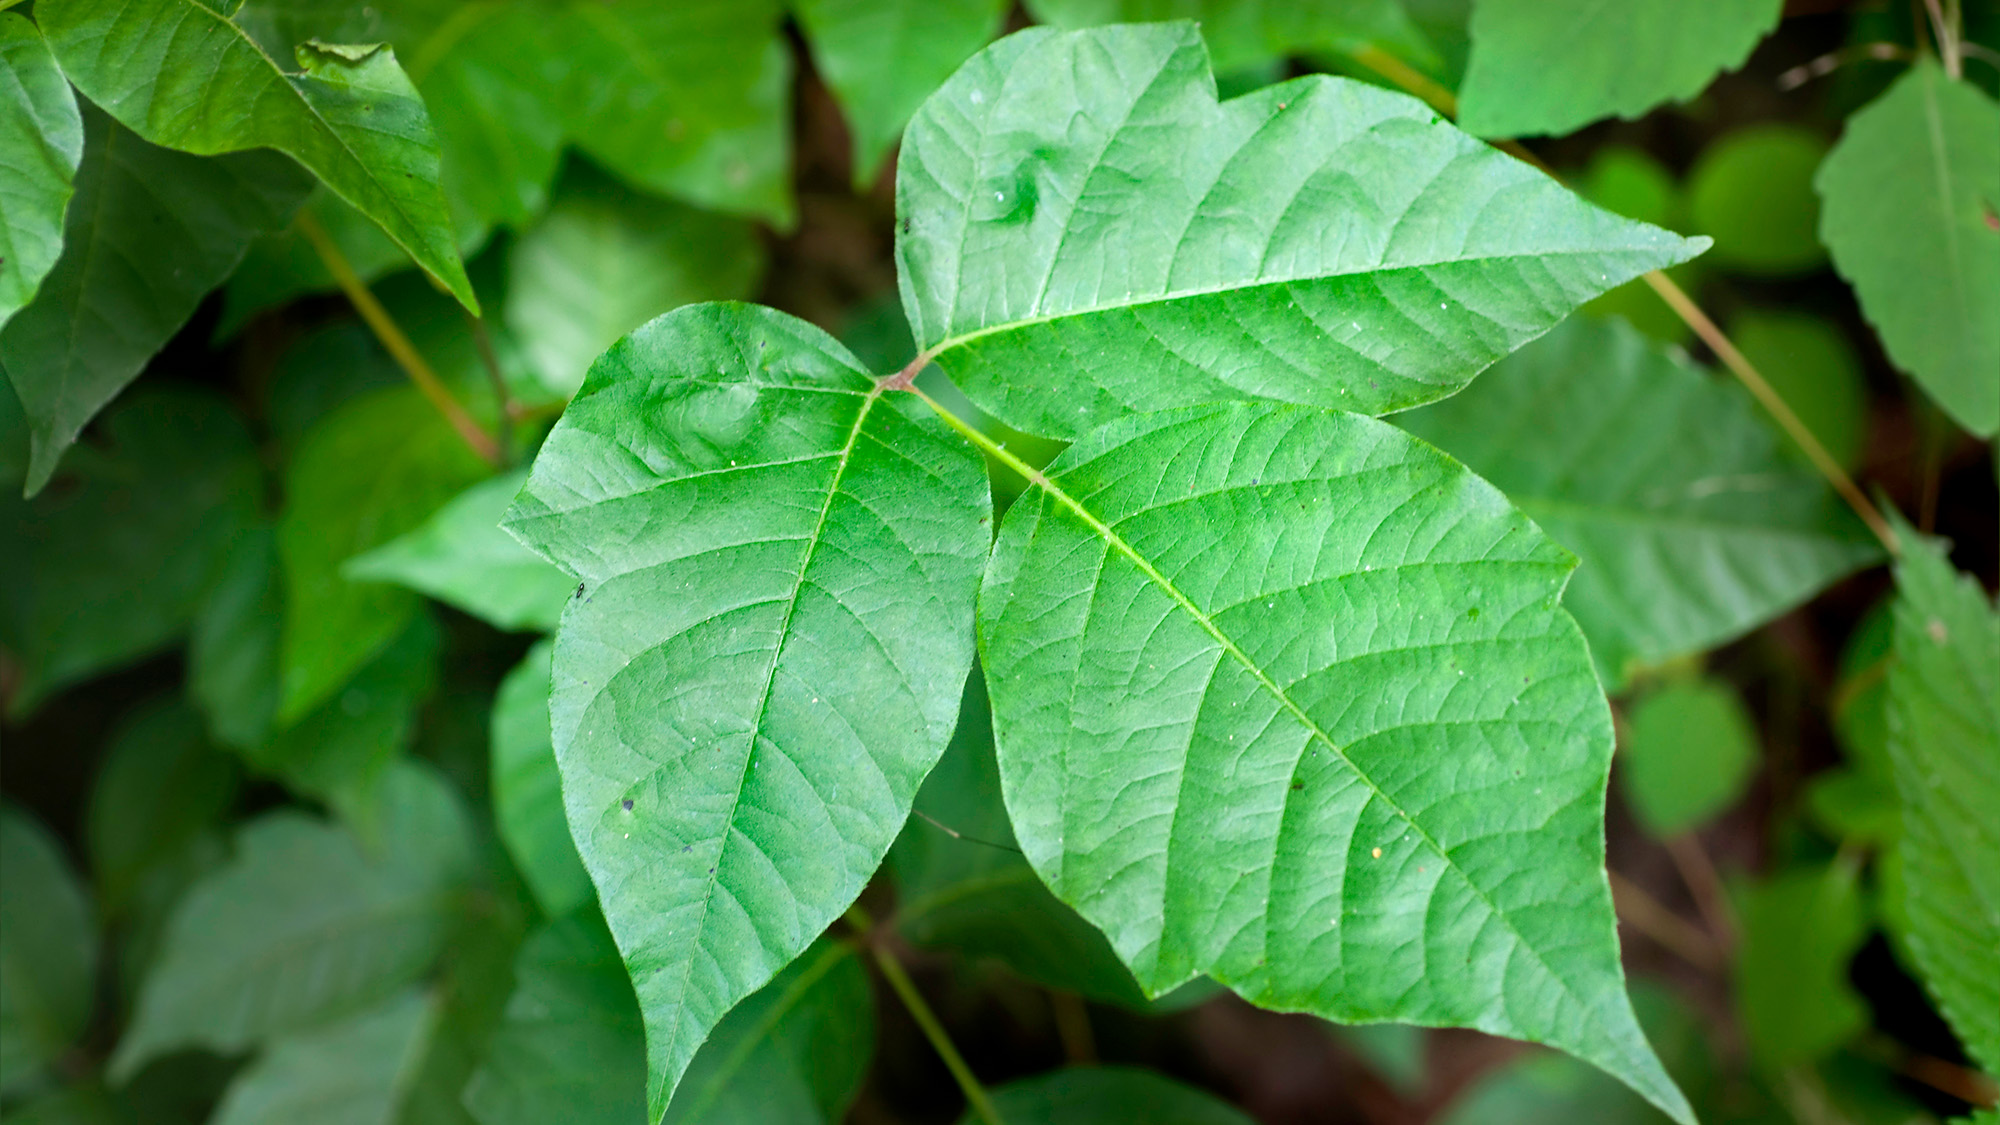 How to keep poison ivy from ruining outdoor fun